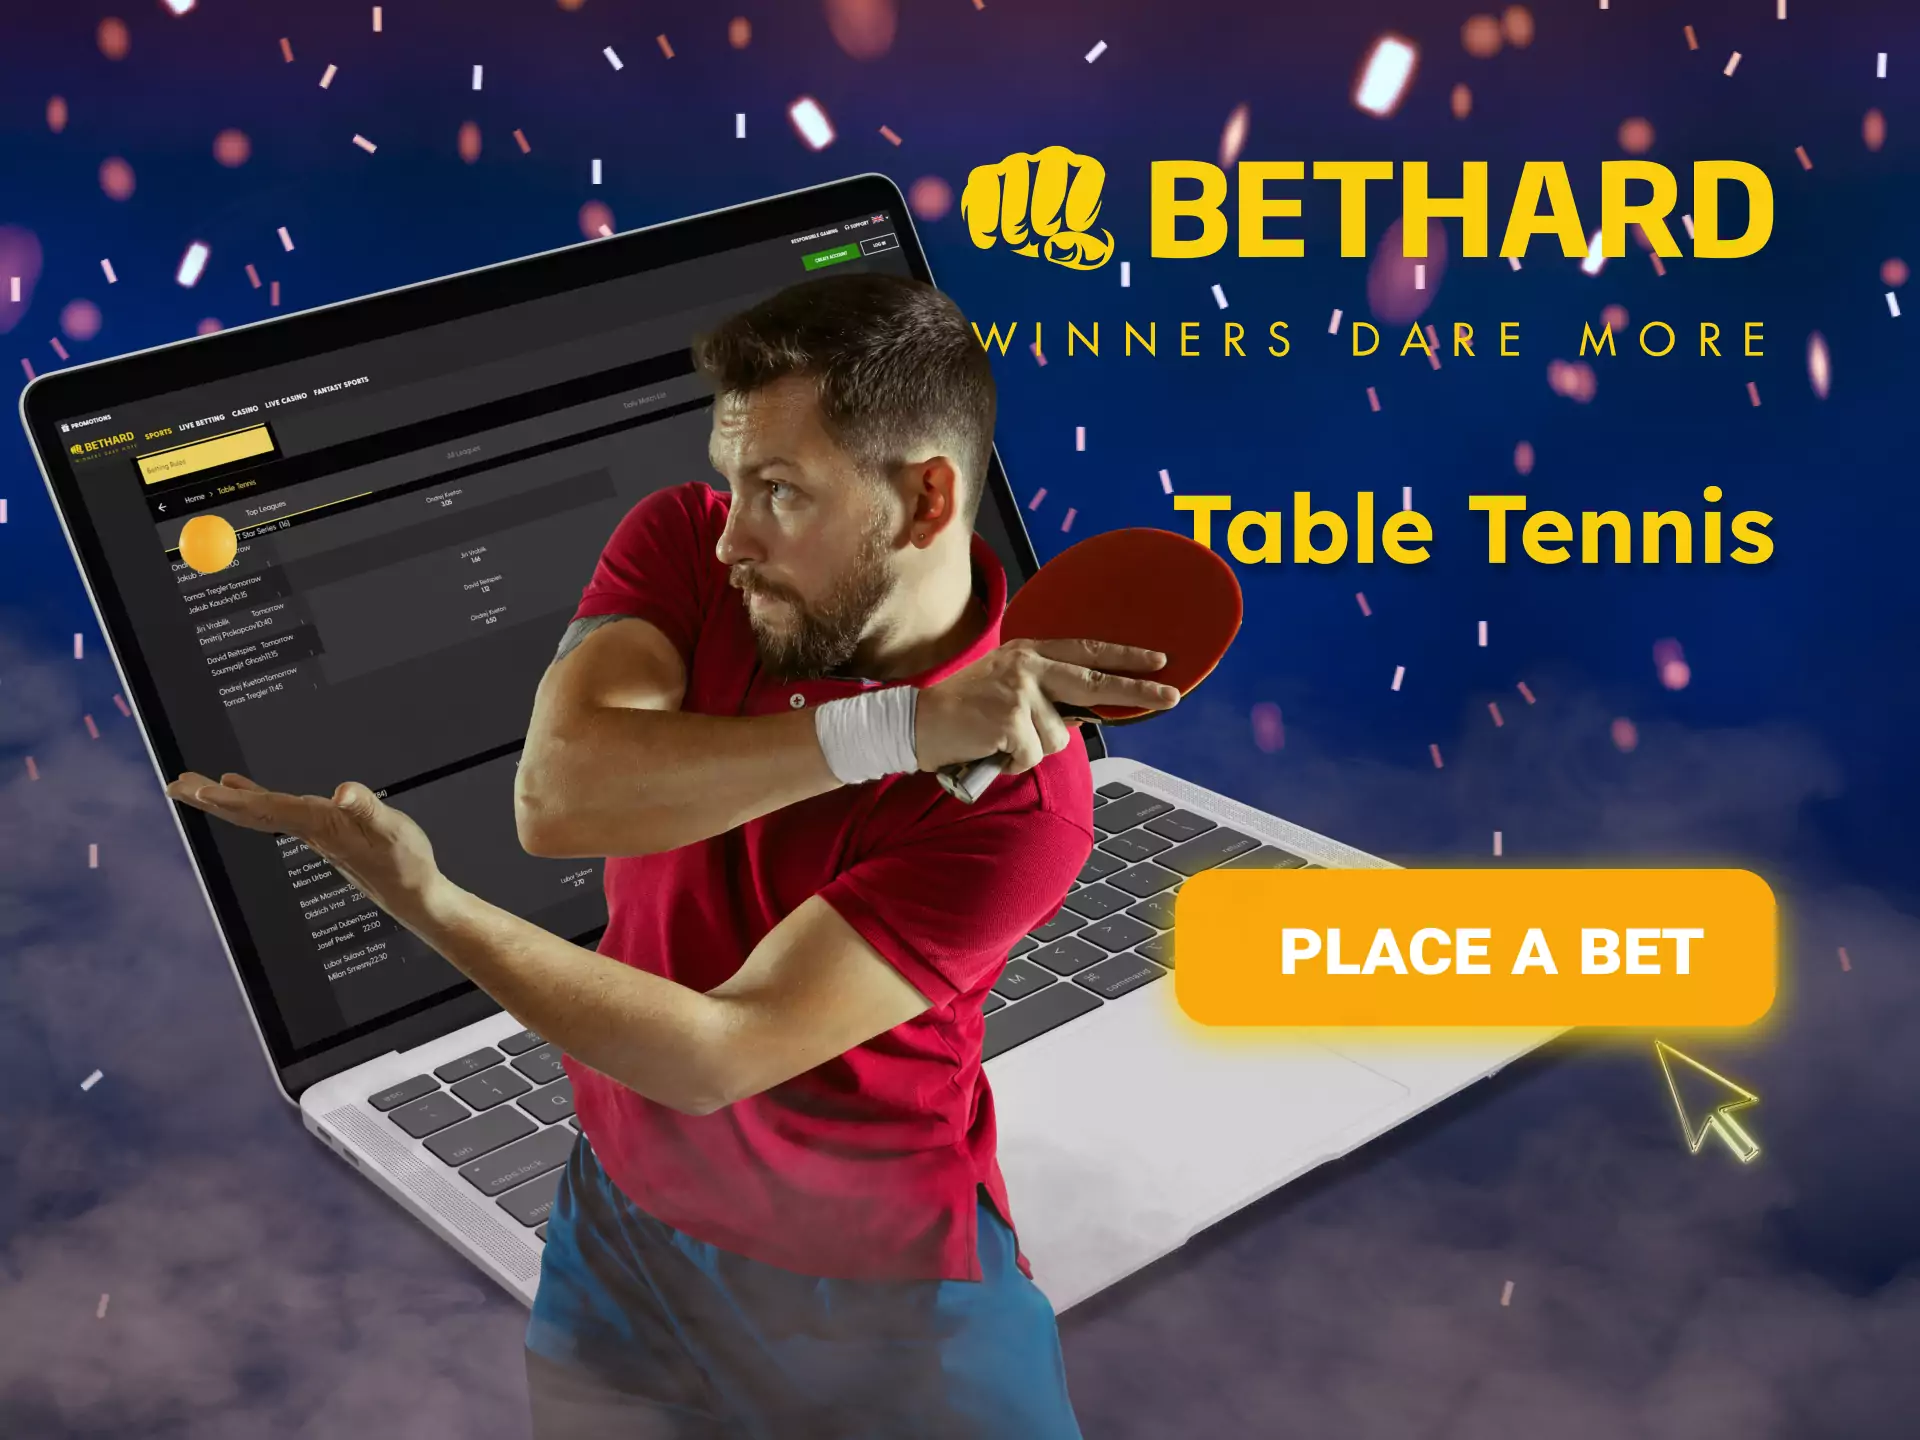 Place bets on table tennis matches with Bethard.